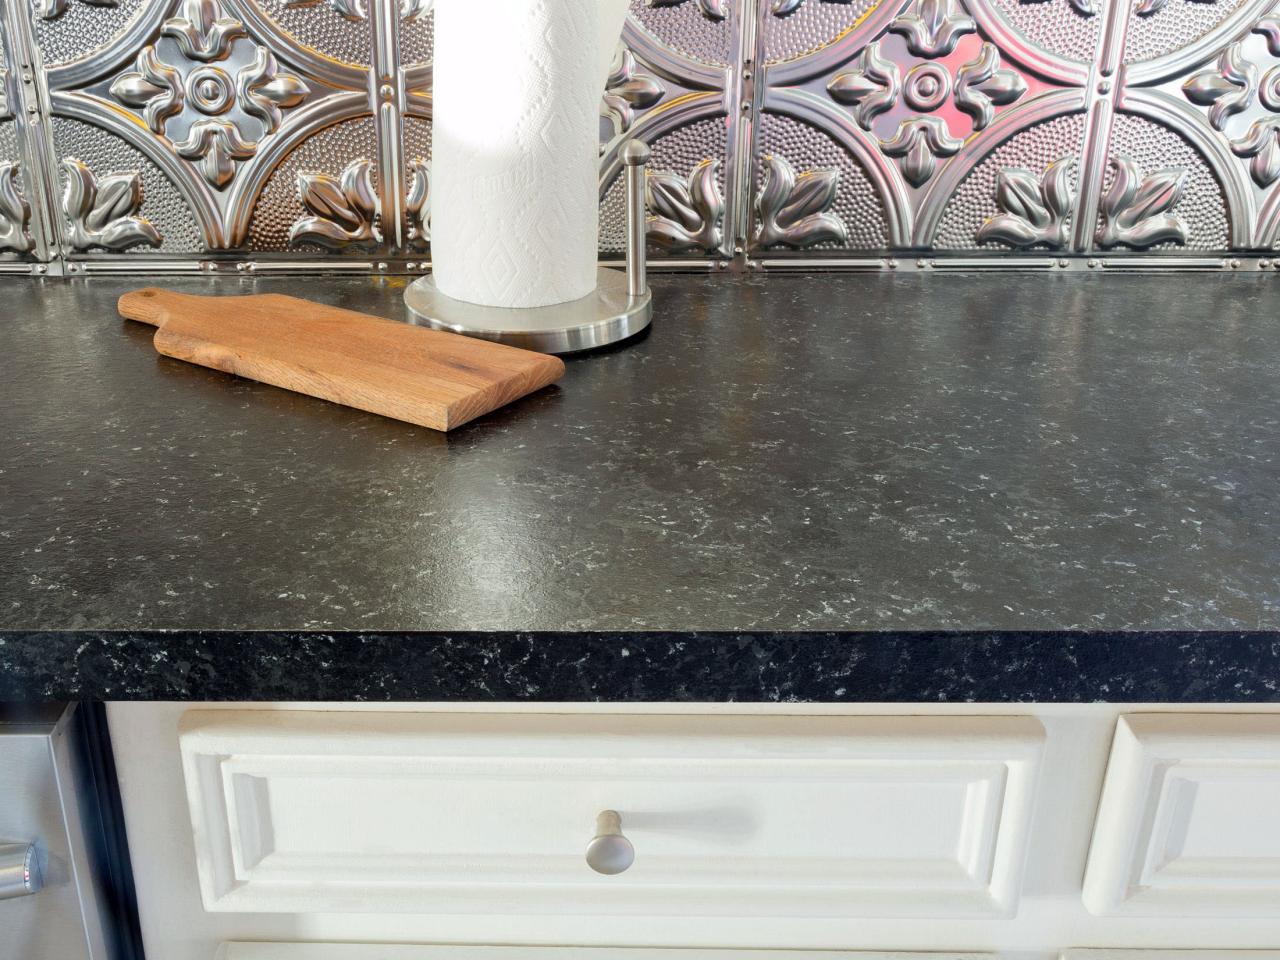 How To Paint A Laminate Countertop, How To Paint Formica Countertops Look Like Marble